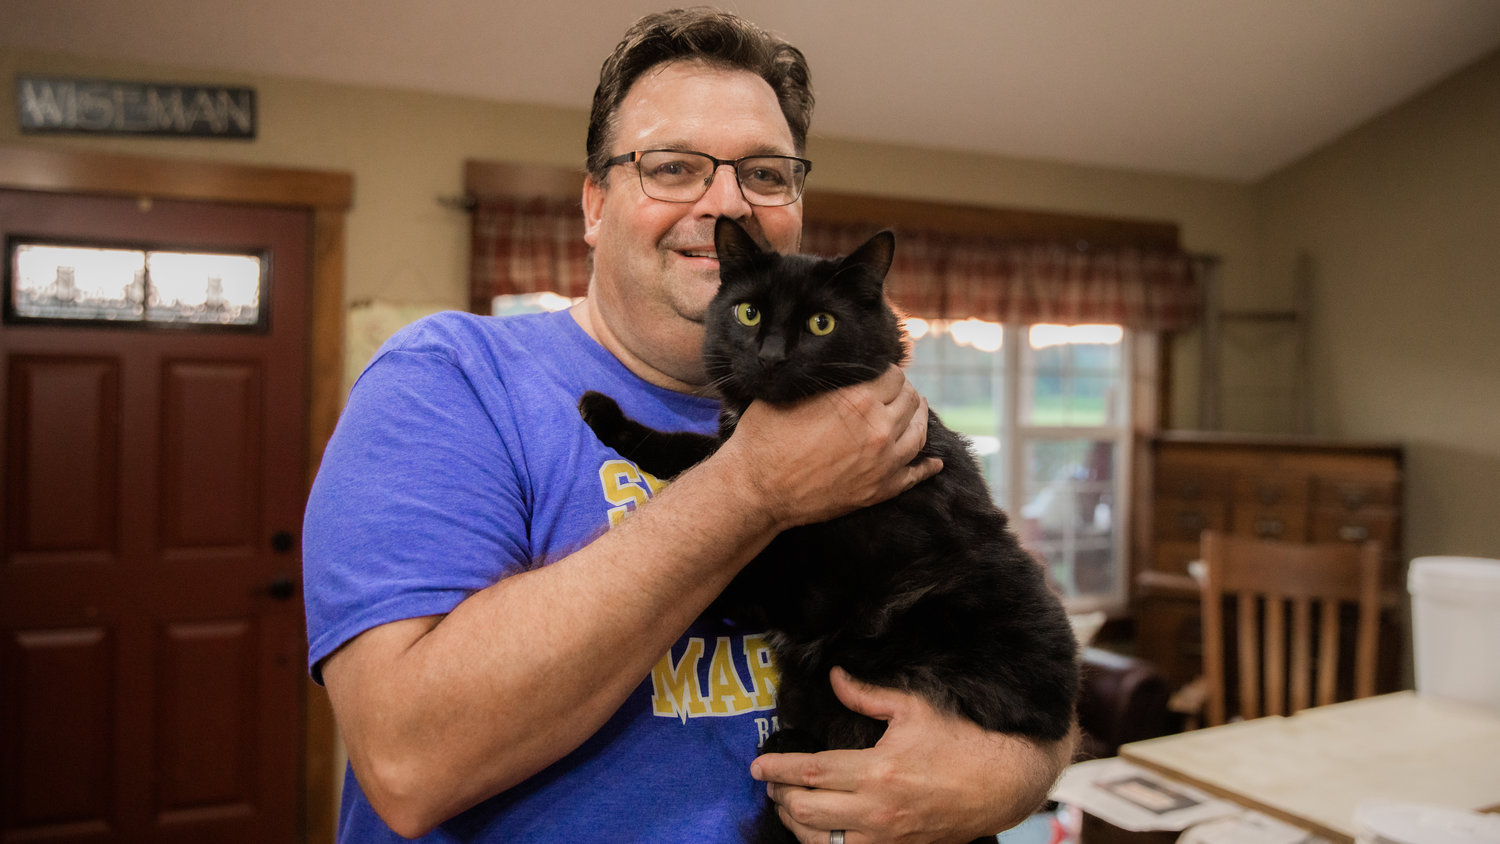 Ken Wiseman smiles for a photo with his cat Raven on Wednesday after he was rescued from a utility pole by Lewis County Public Utility District employees outside his residence along Frogner Road.